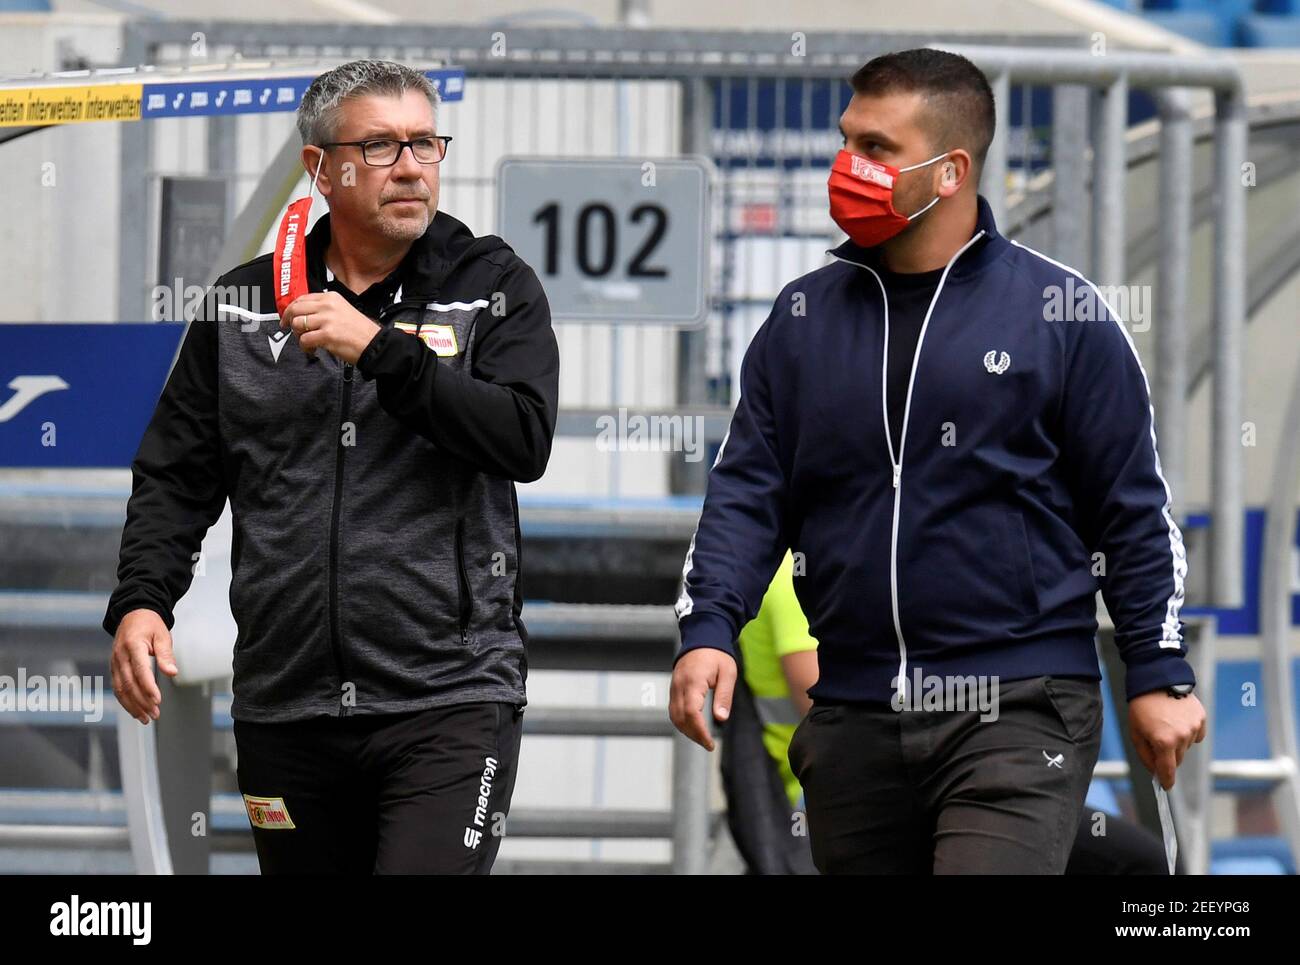 Soccer Football - Bundesliga - TSG 1899 Hoffenheim v 1. FC Union Berlin - PreZero Arena, Sinsheim, Germany - June 20, 2020 1. FC Union Berlin coach Urs Fischer during the warm up before the match following the resumption of play behind closed doors after the outbreak of the coronavirus disease (COVID-19)  Thomas Kienzle/Pool via REUTERS  DFL regulations prohibit any use of photographs as image sequences and/or quasi-video Stock Photo